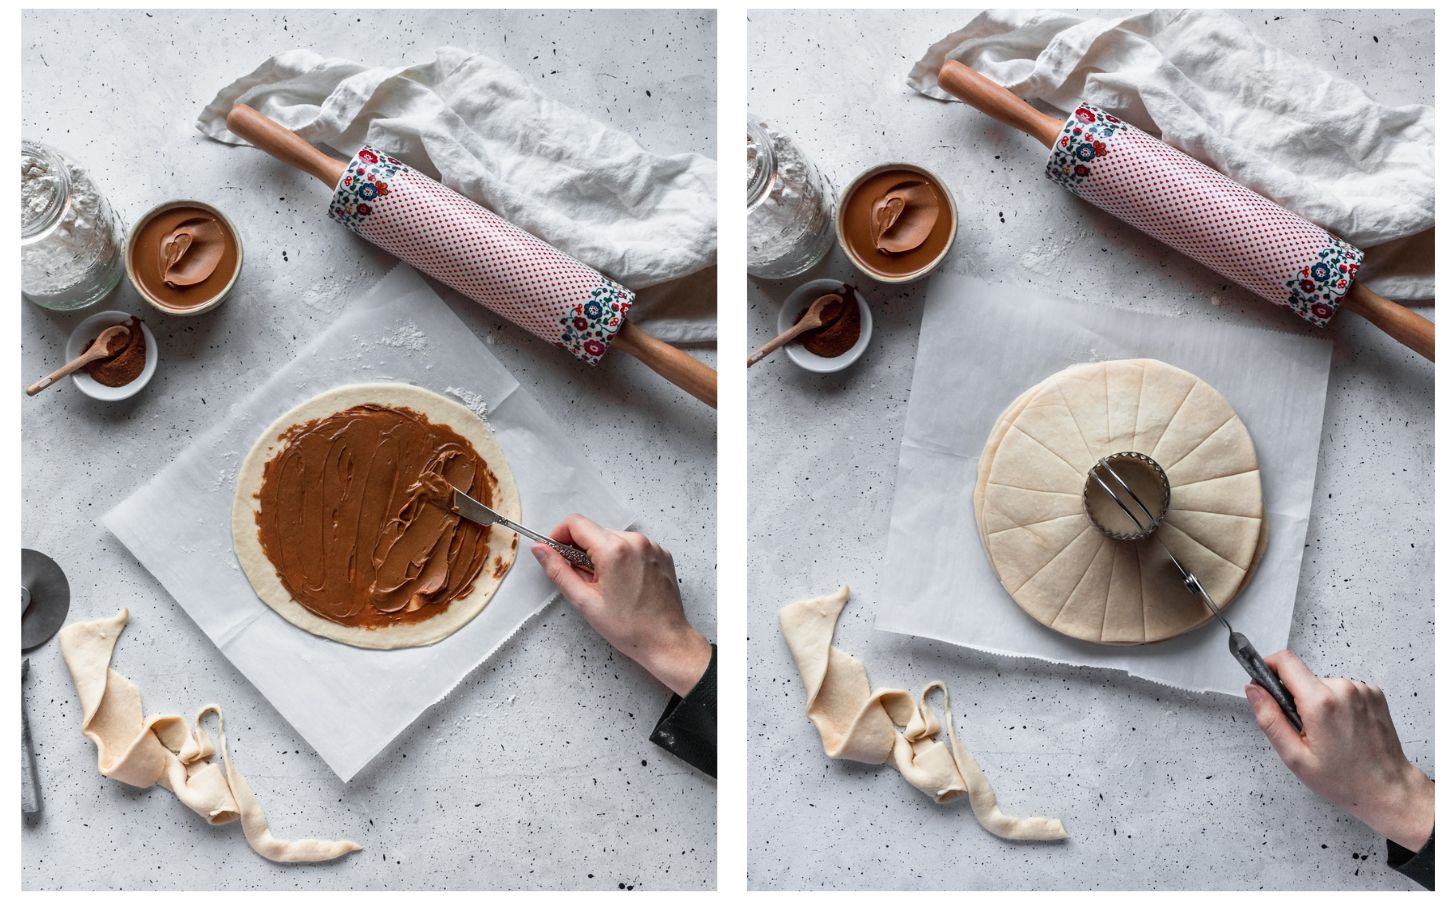 Two images; on the right, a woman spreading cookie butter on dough next to a rolling pin, baking ingredients, and a white napkin. On the right, the woman is cutting the dough with a pizza cutter.